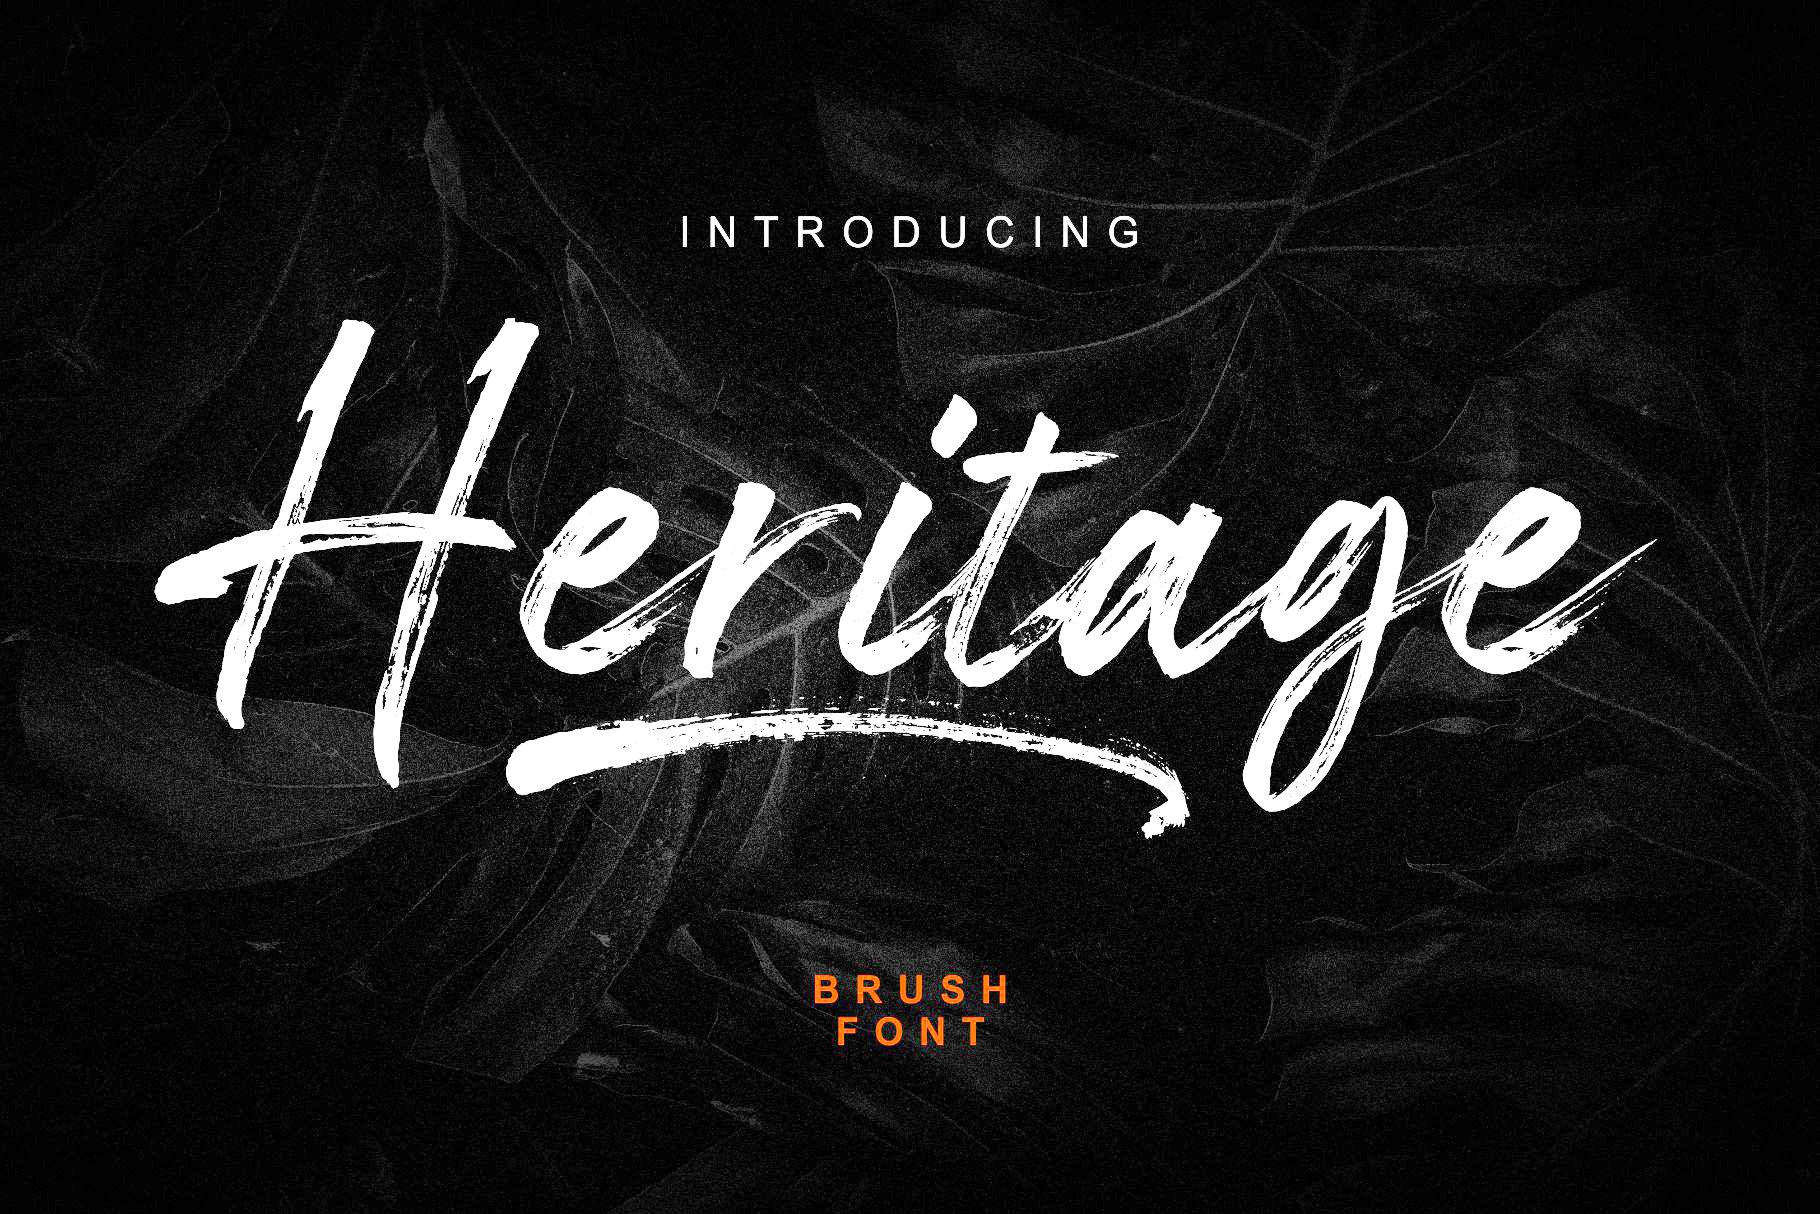 Heritage Brush Font cover image.